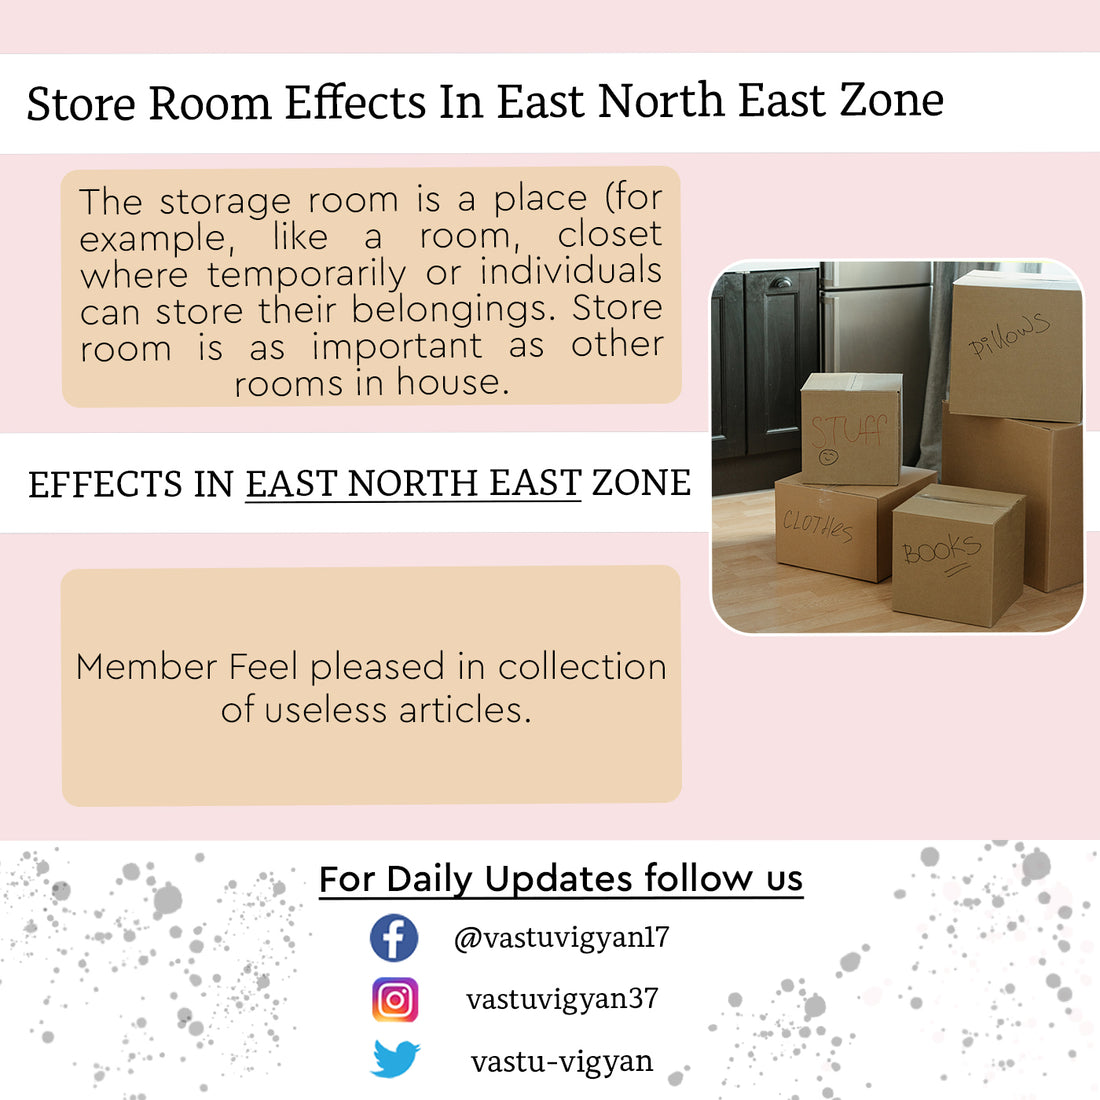 Store Room Effects in East North East Zone